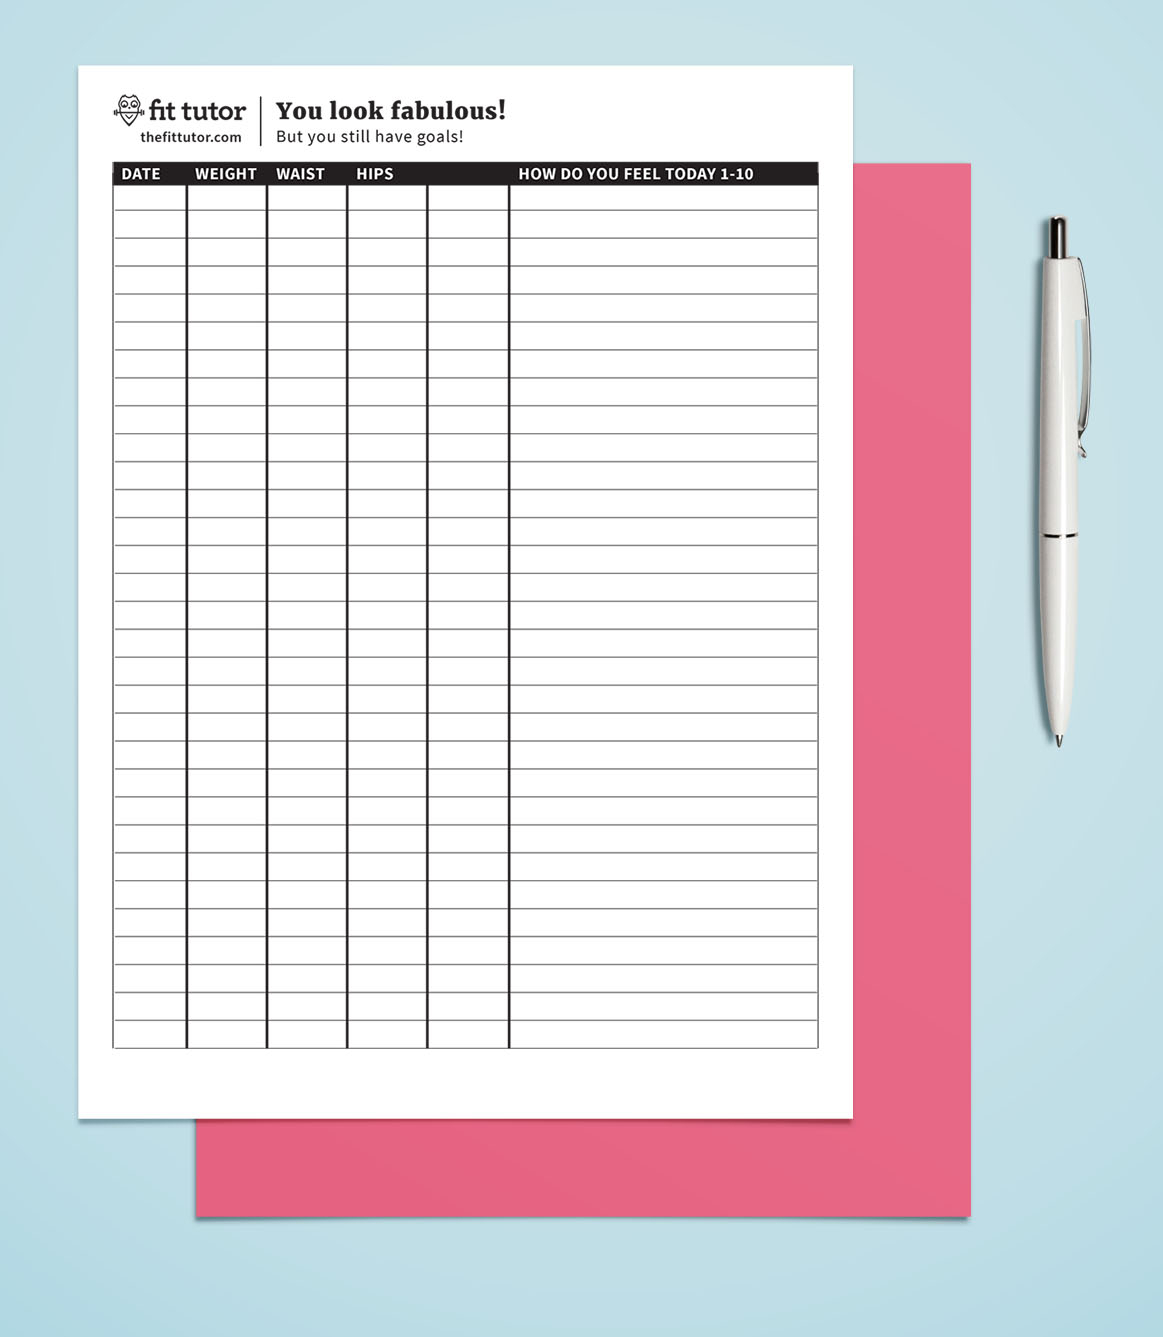 weight loss tracker template free